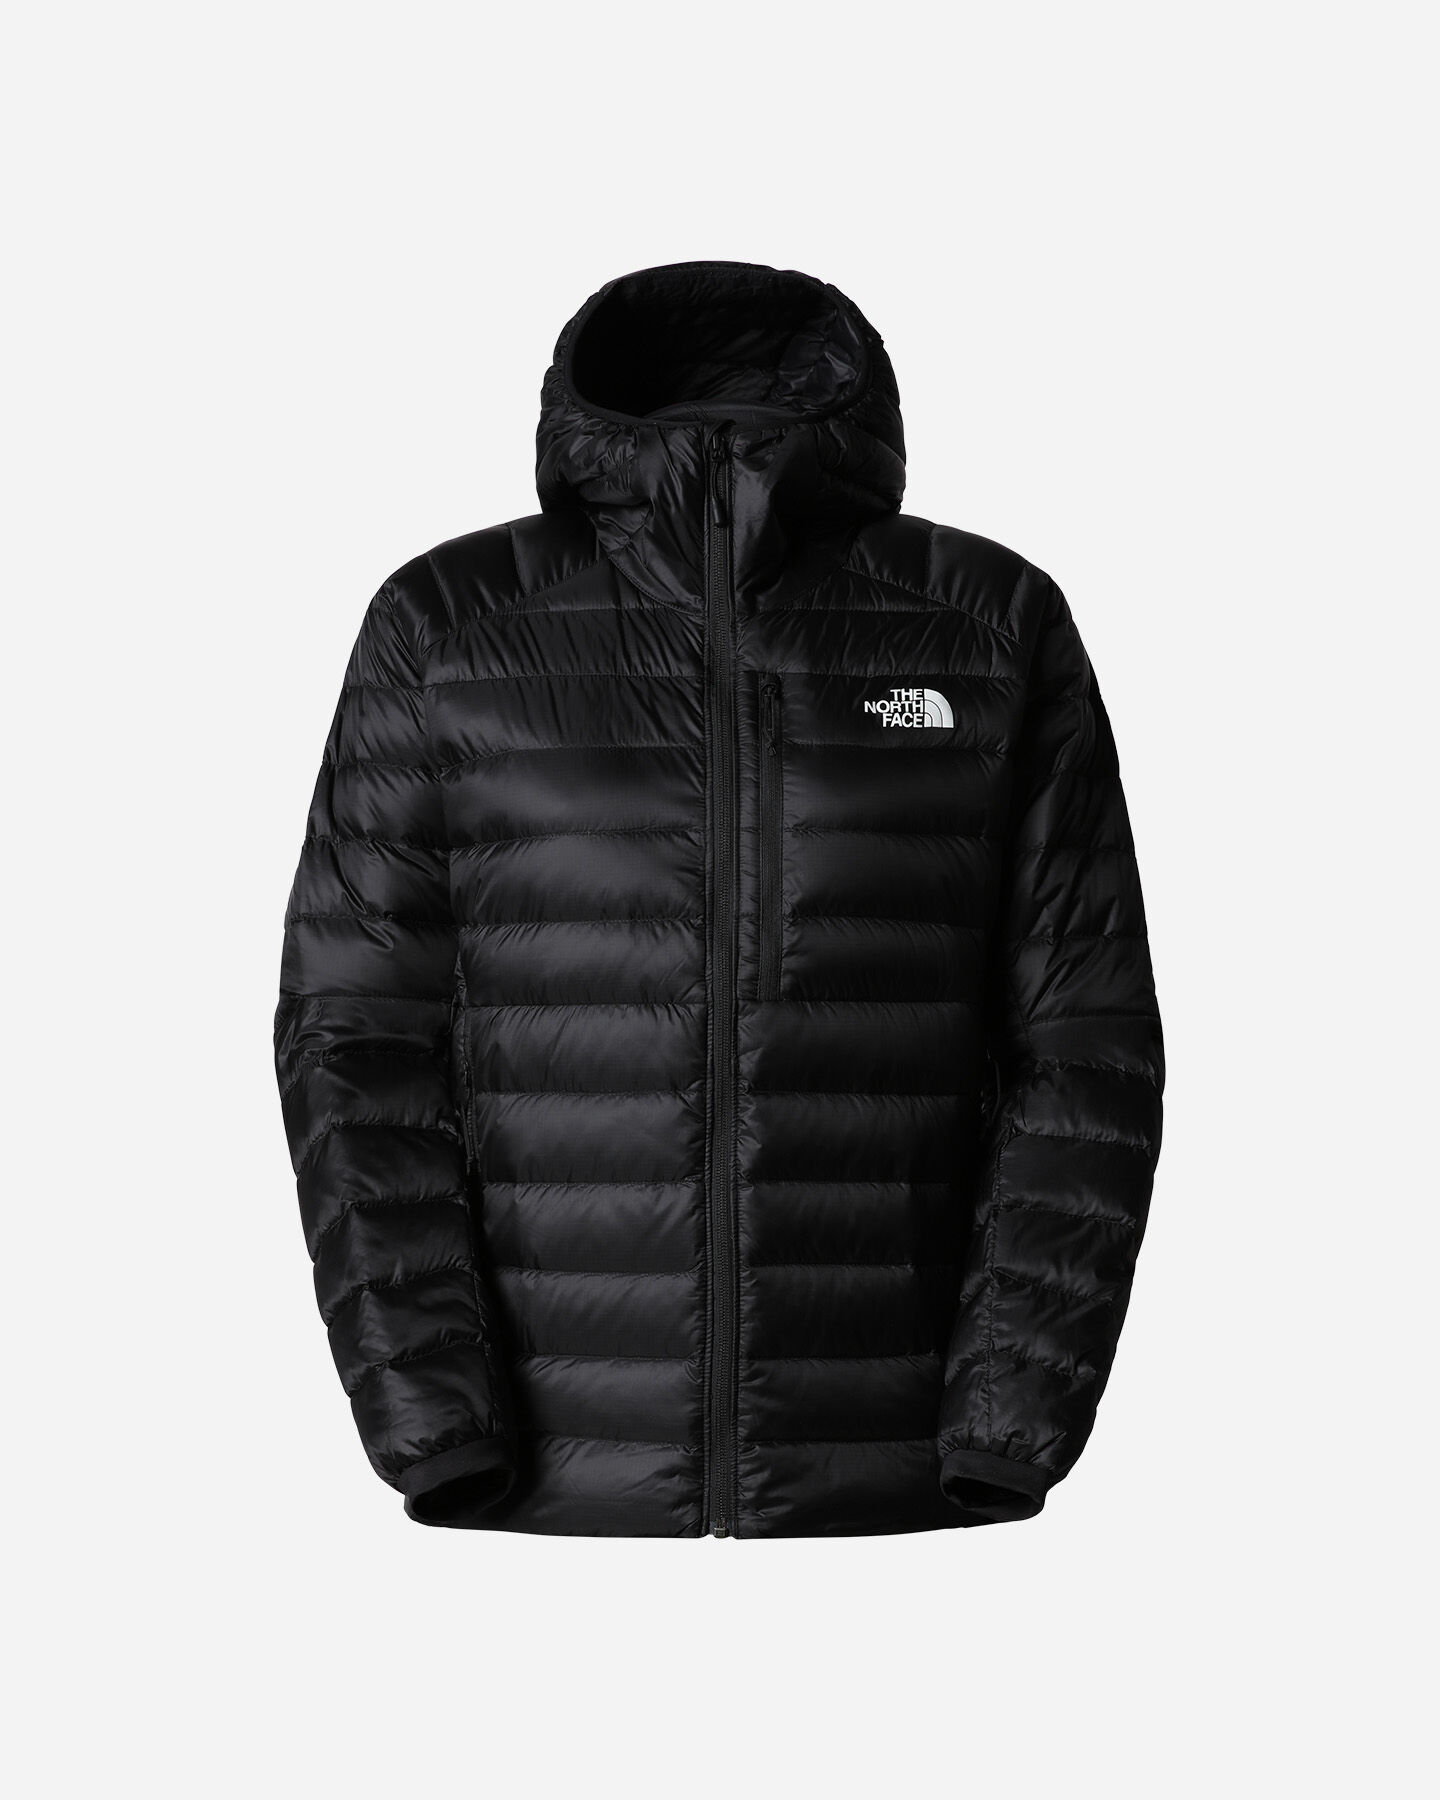  Giacca outdoor THE NORTH FACE SUMMIT BREITHORN W S5475513|JK3|XS scatto 0